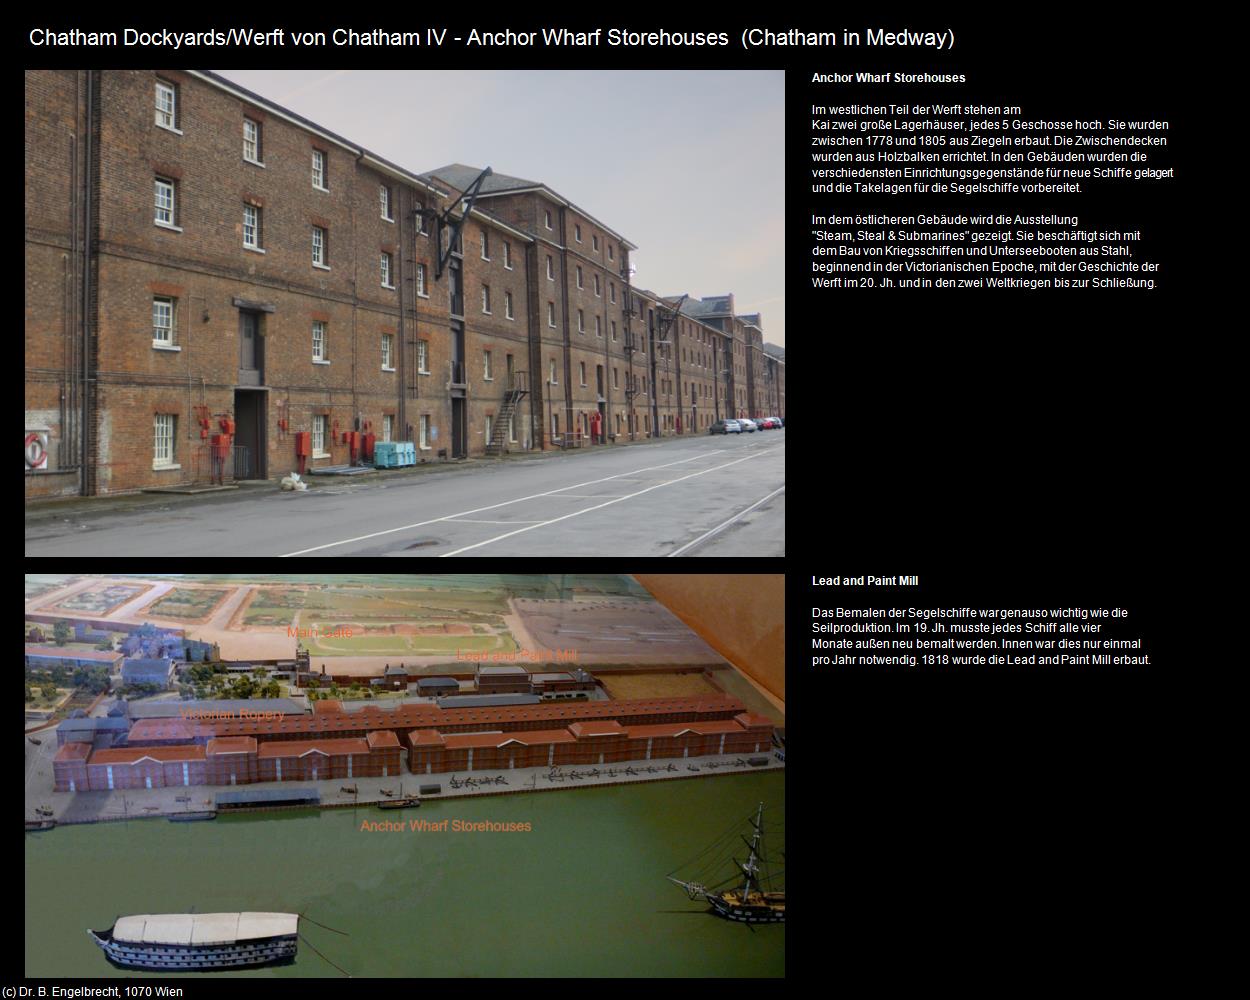 Anchor wharf storehouses (Chatham in Medway, England) in Kulturatlas-ENGLAND und WALES